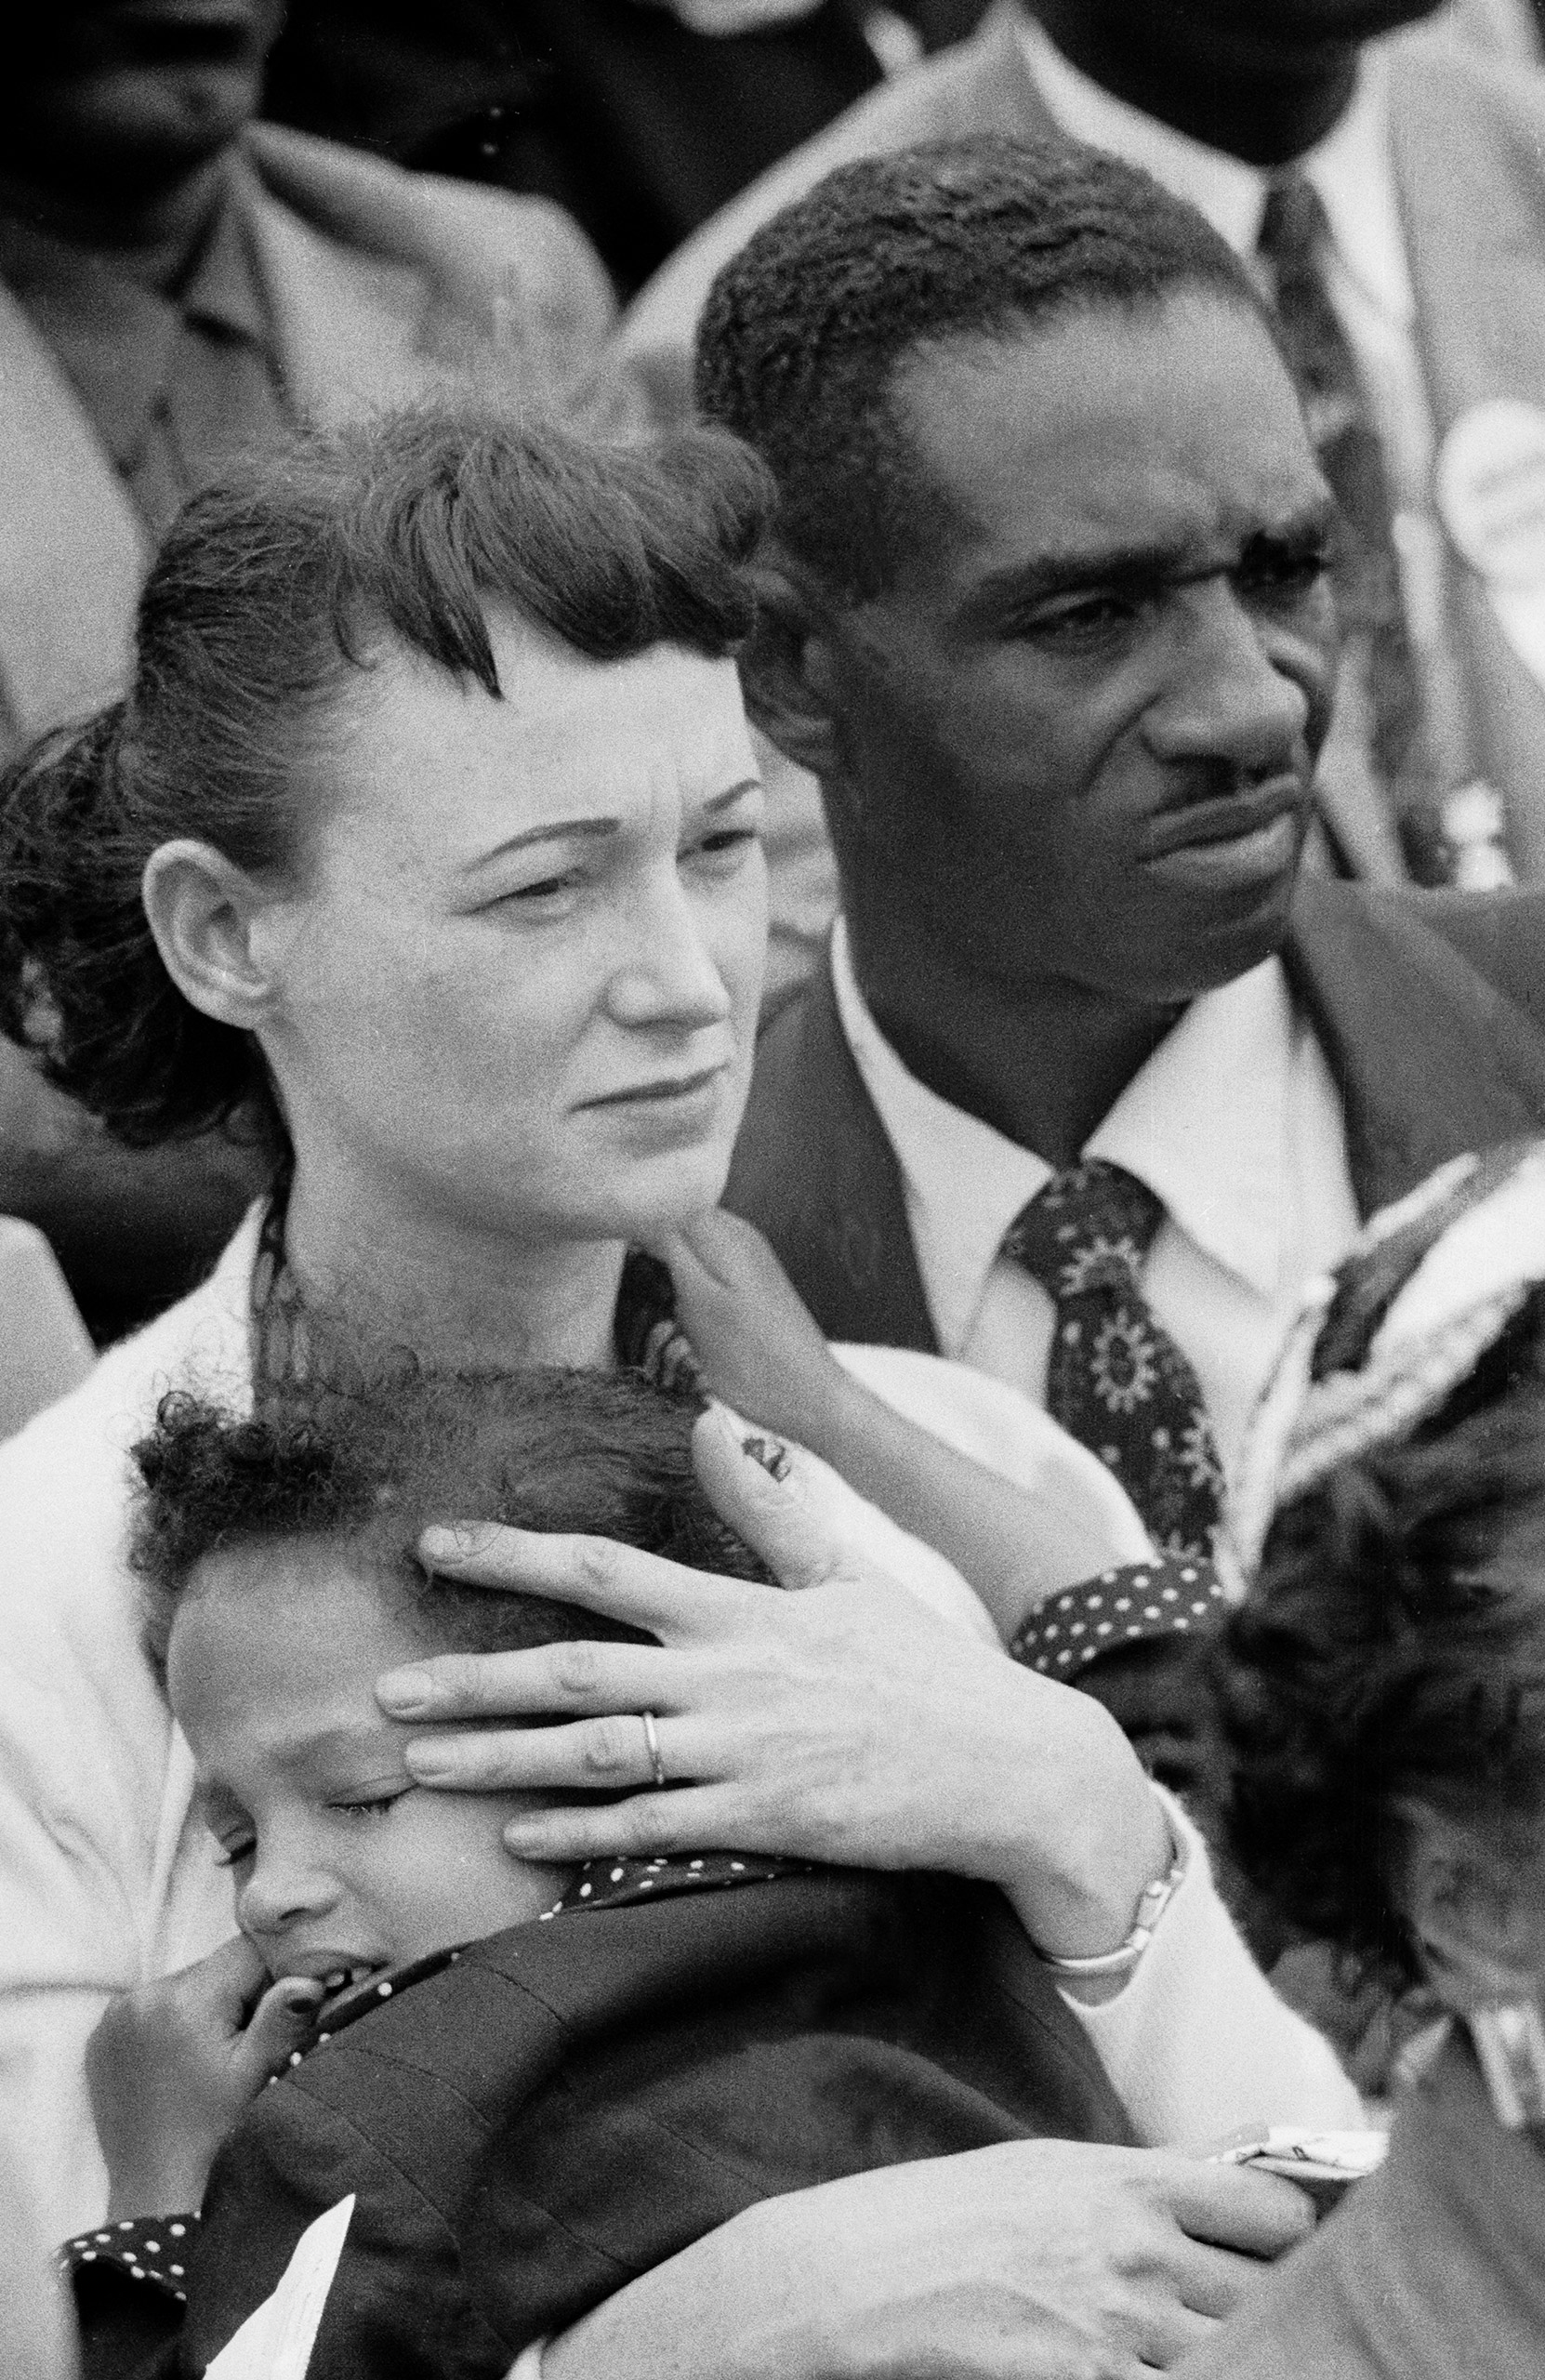 Faces from MLK's Prayer Pilgrimage for Freedom in Washington D.C., 1957.